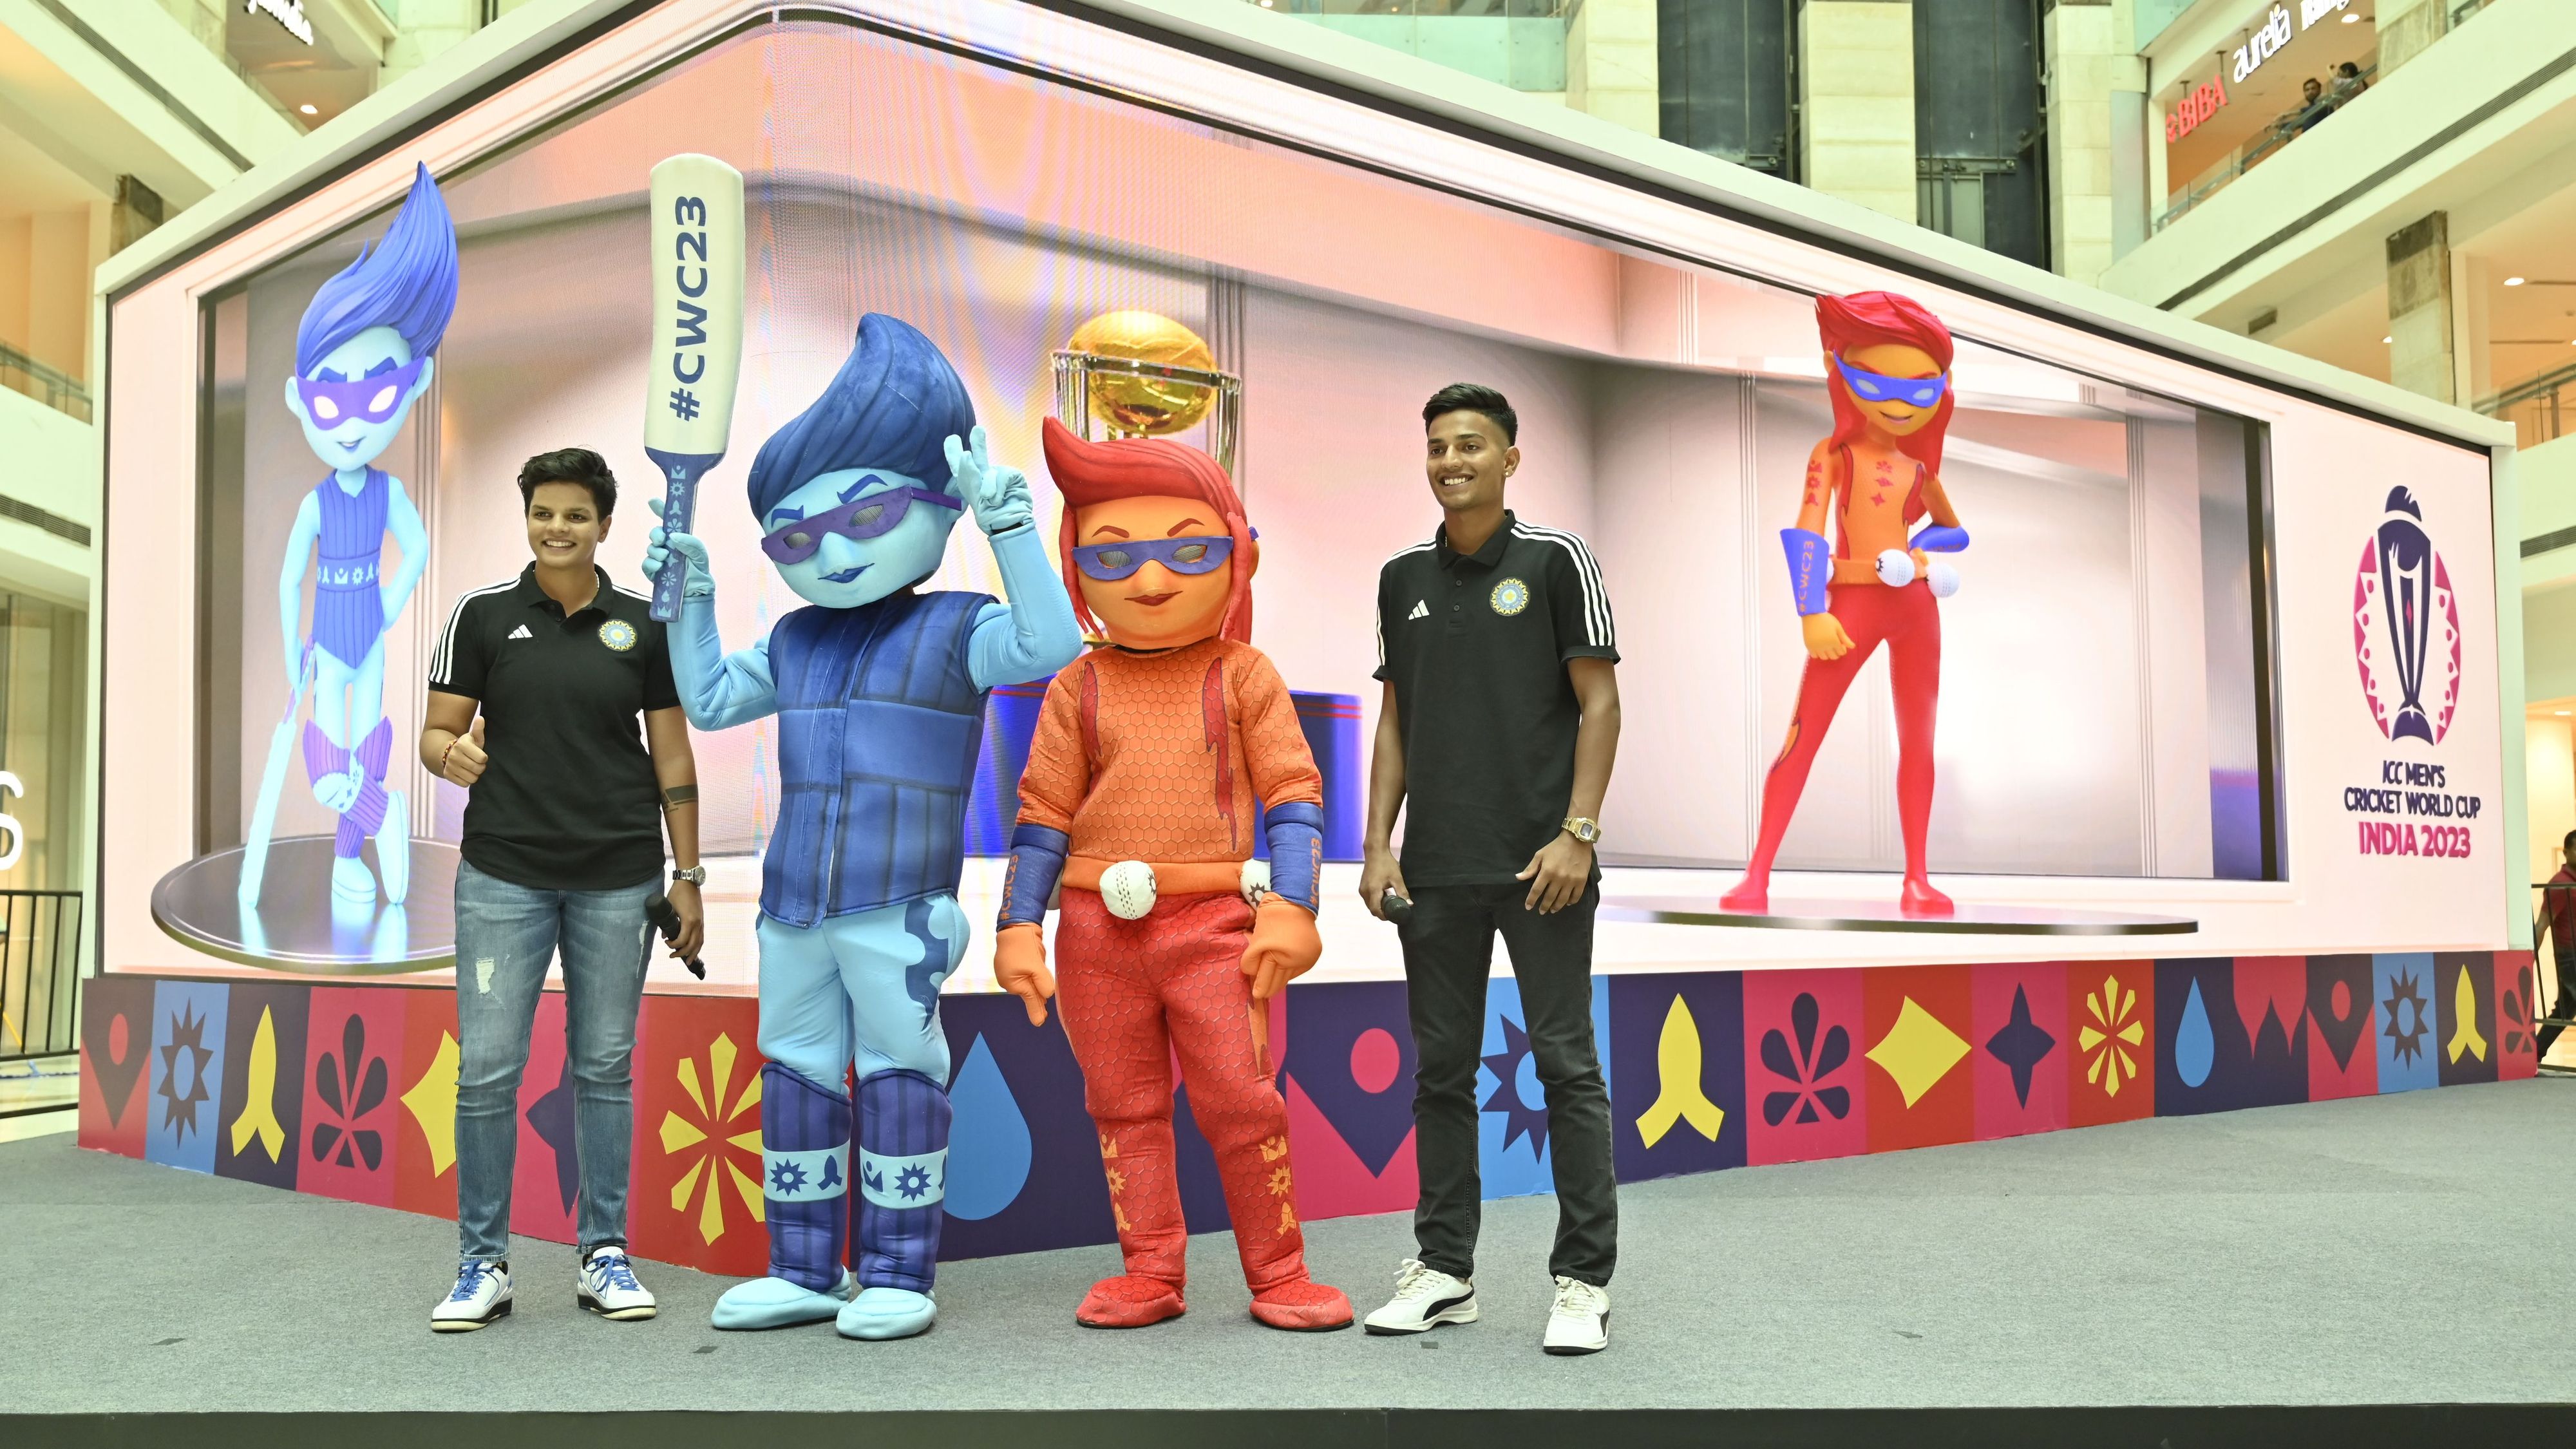 ICC launches vibrant mascot for Men's ODI World Cup in India, to engage